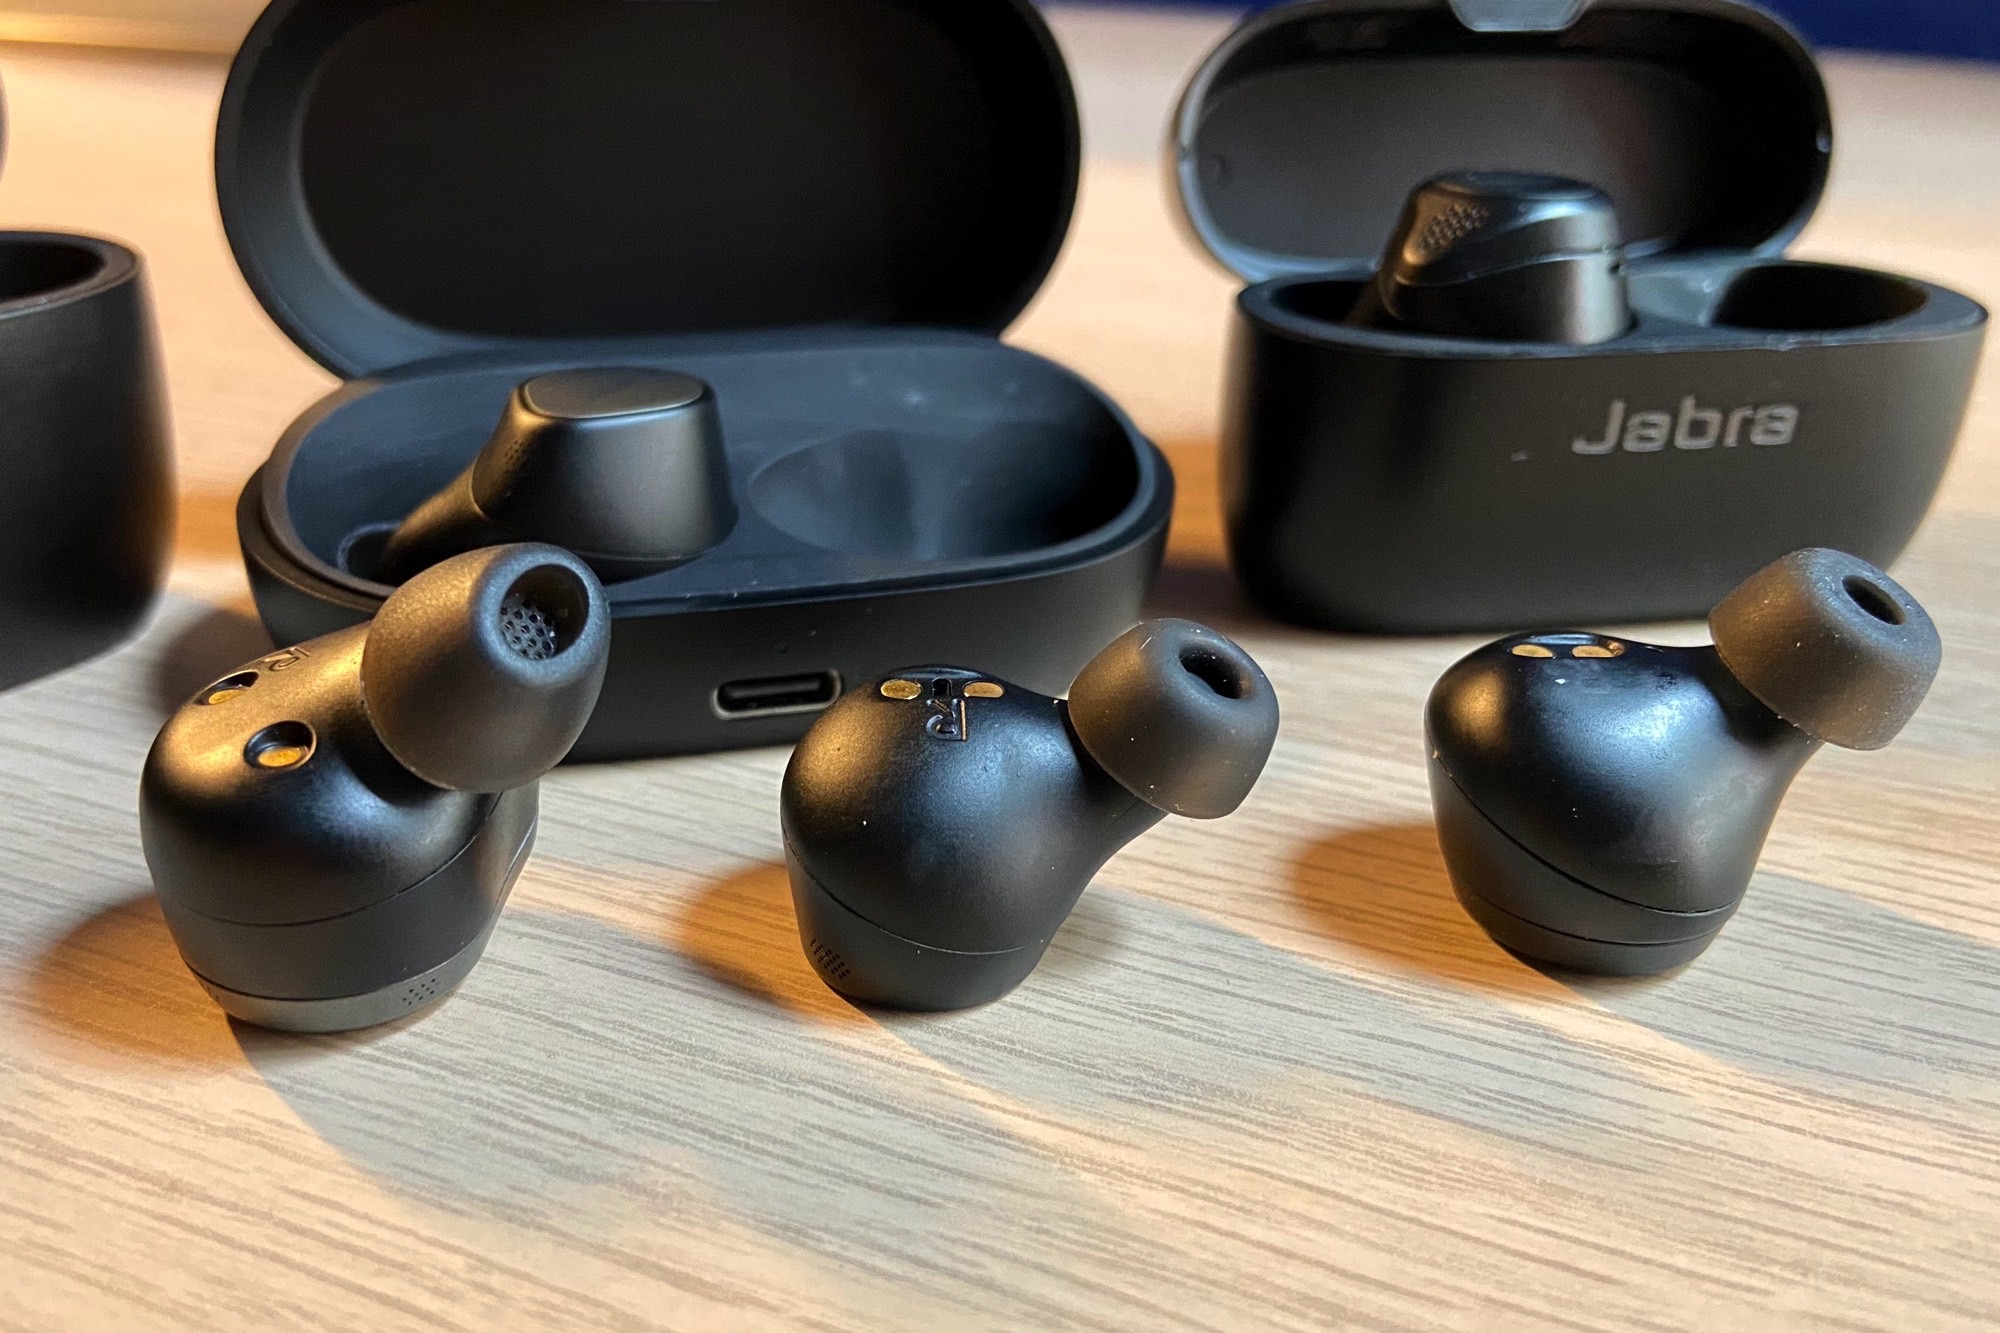 Jabra Elite 7 Pro Review: The Best Wireless Earbuds for Making Calls